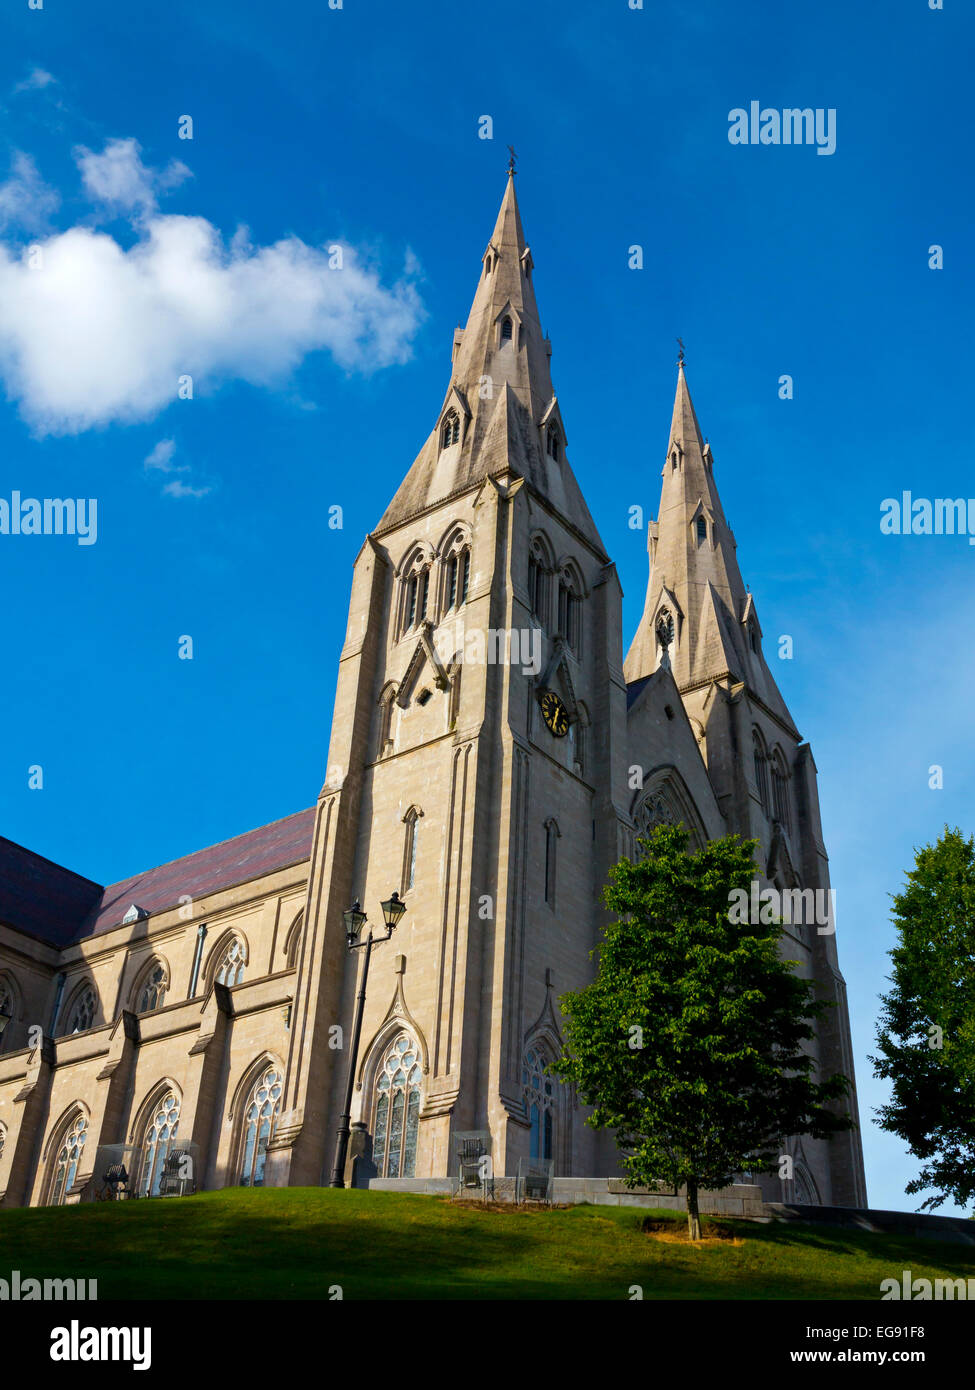 The twin spires of St Patrick's Roman Catholic Cathedral in Armagh Northern Ireland built 1840-1904 in Gothic Revival style Stock Photo